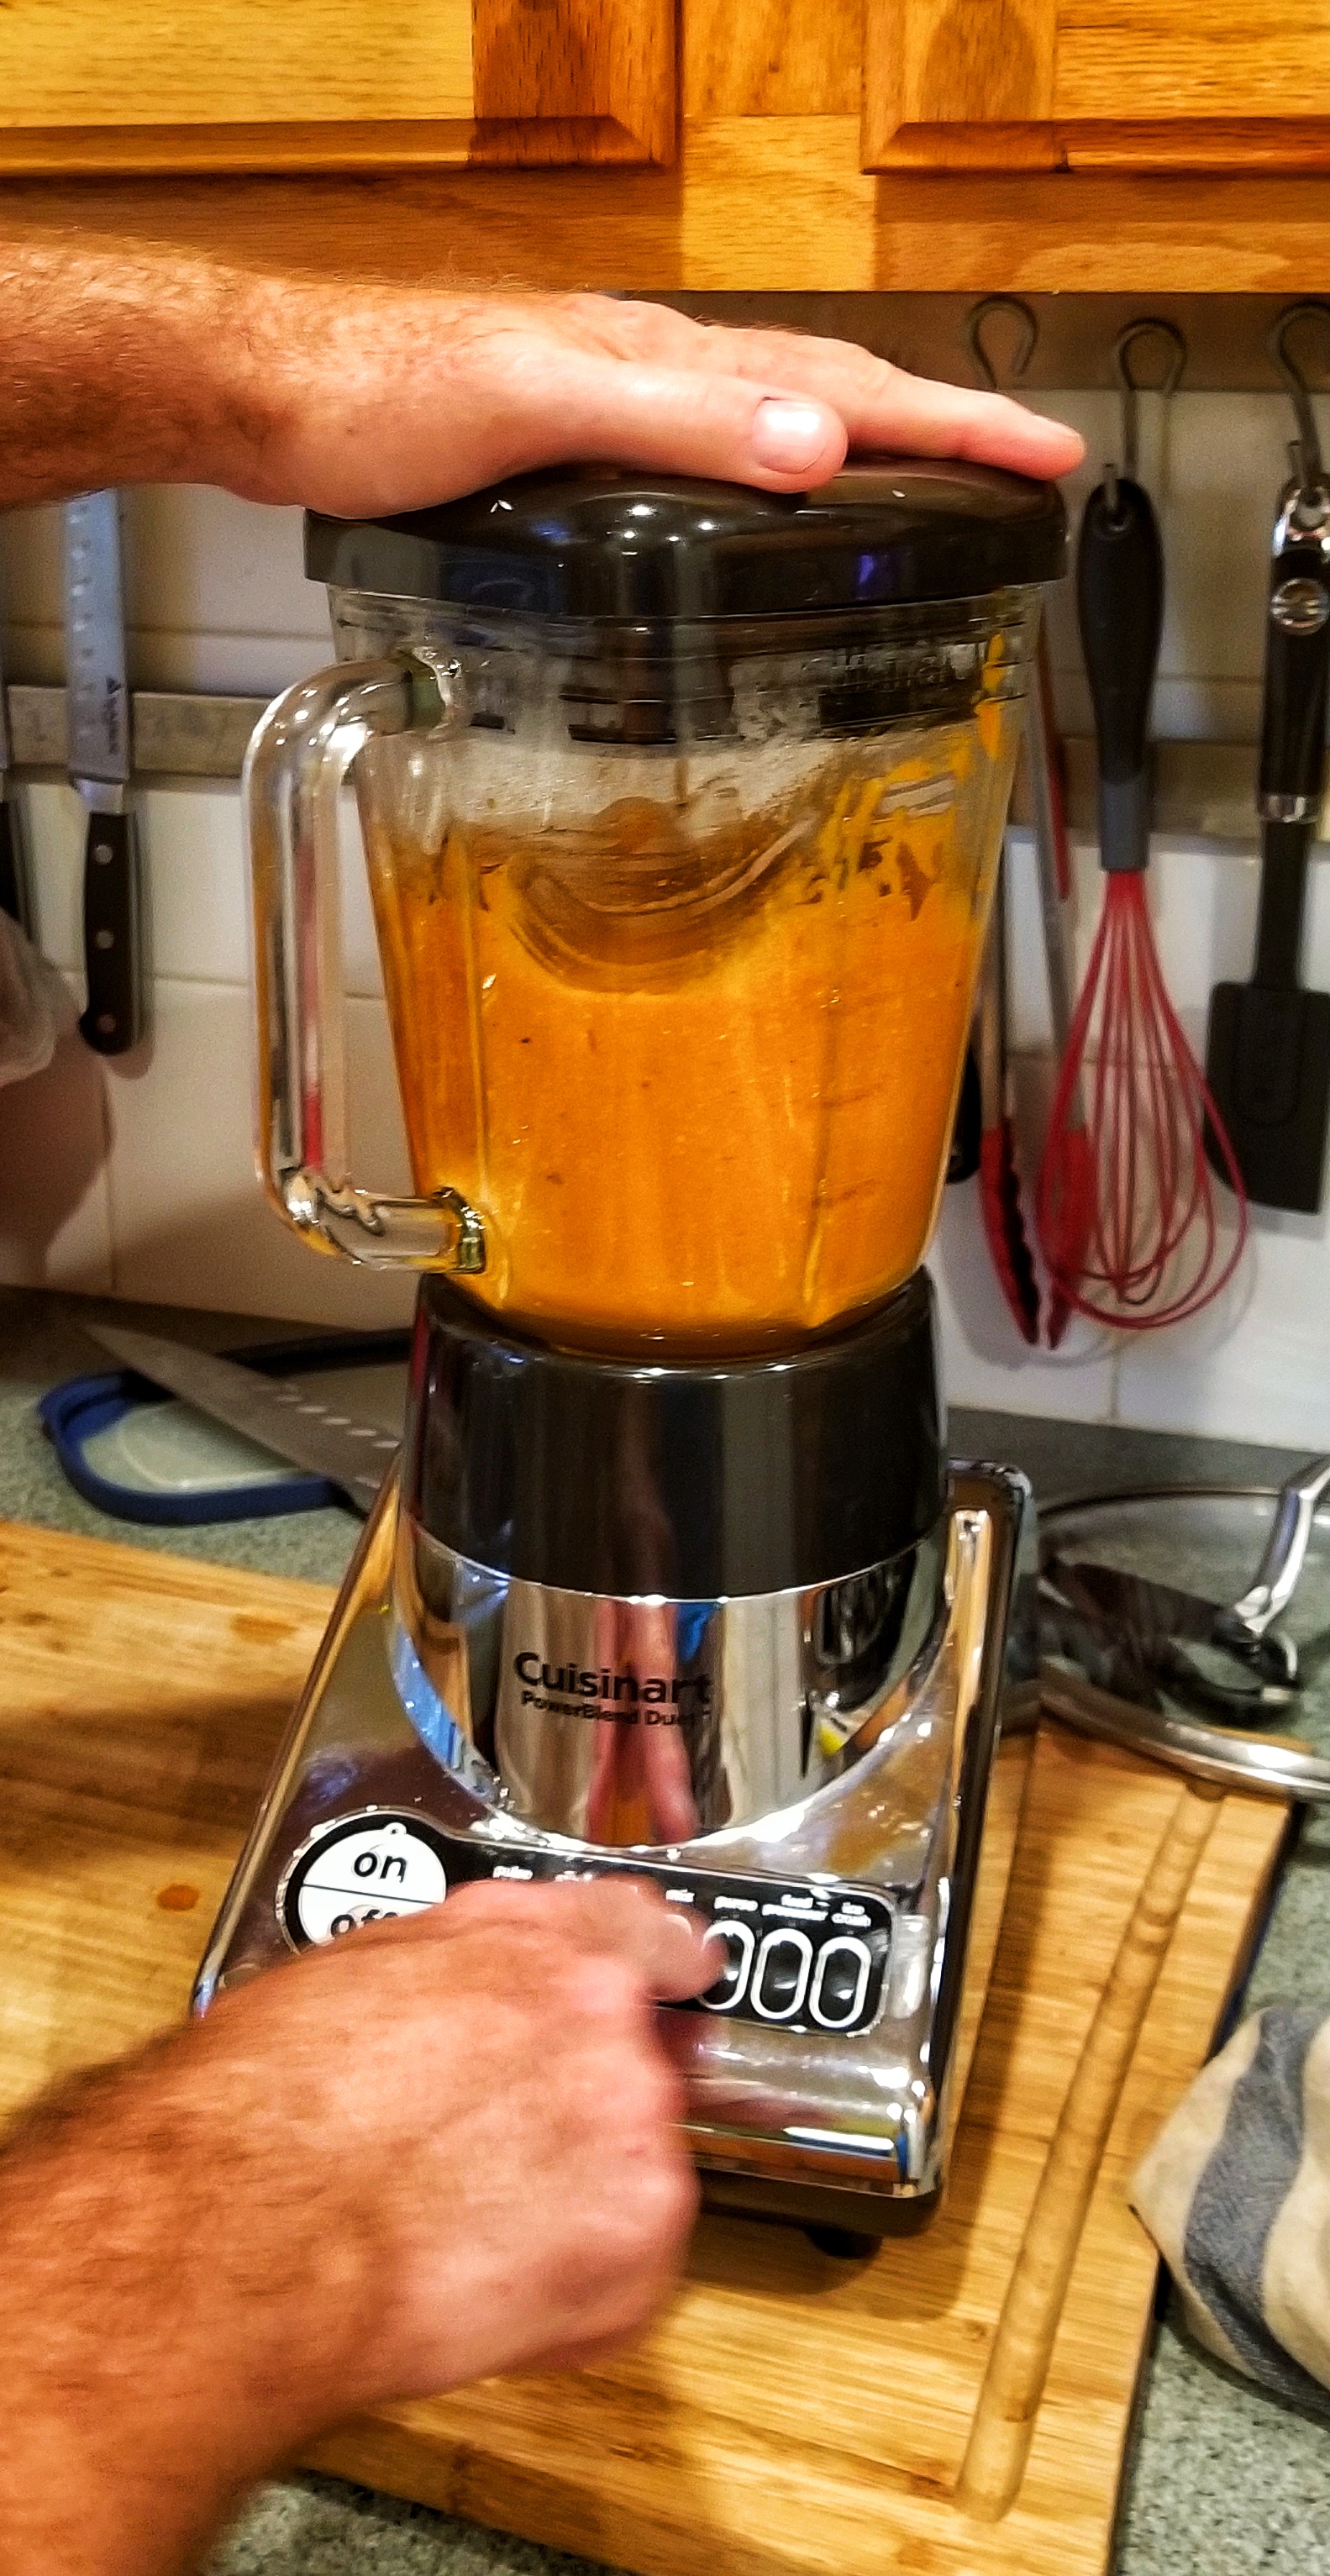 Smoked Jalapeno Sauce being mixed in the blender.